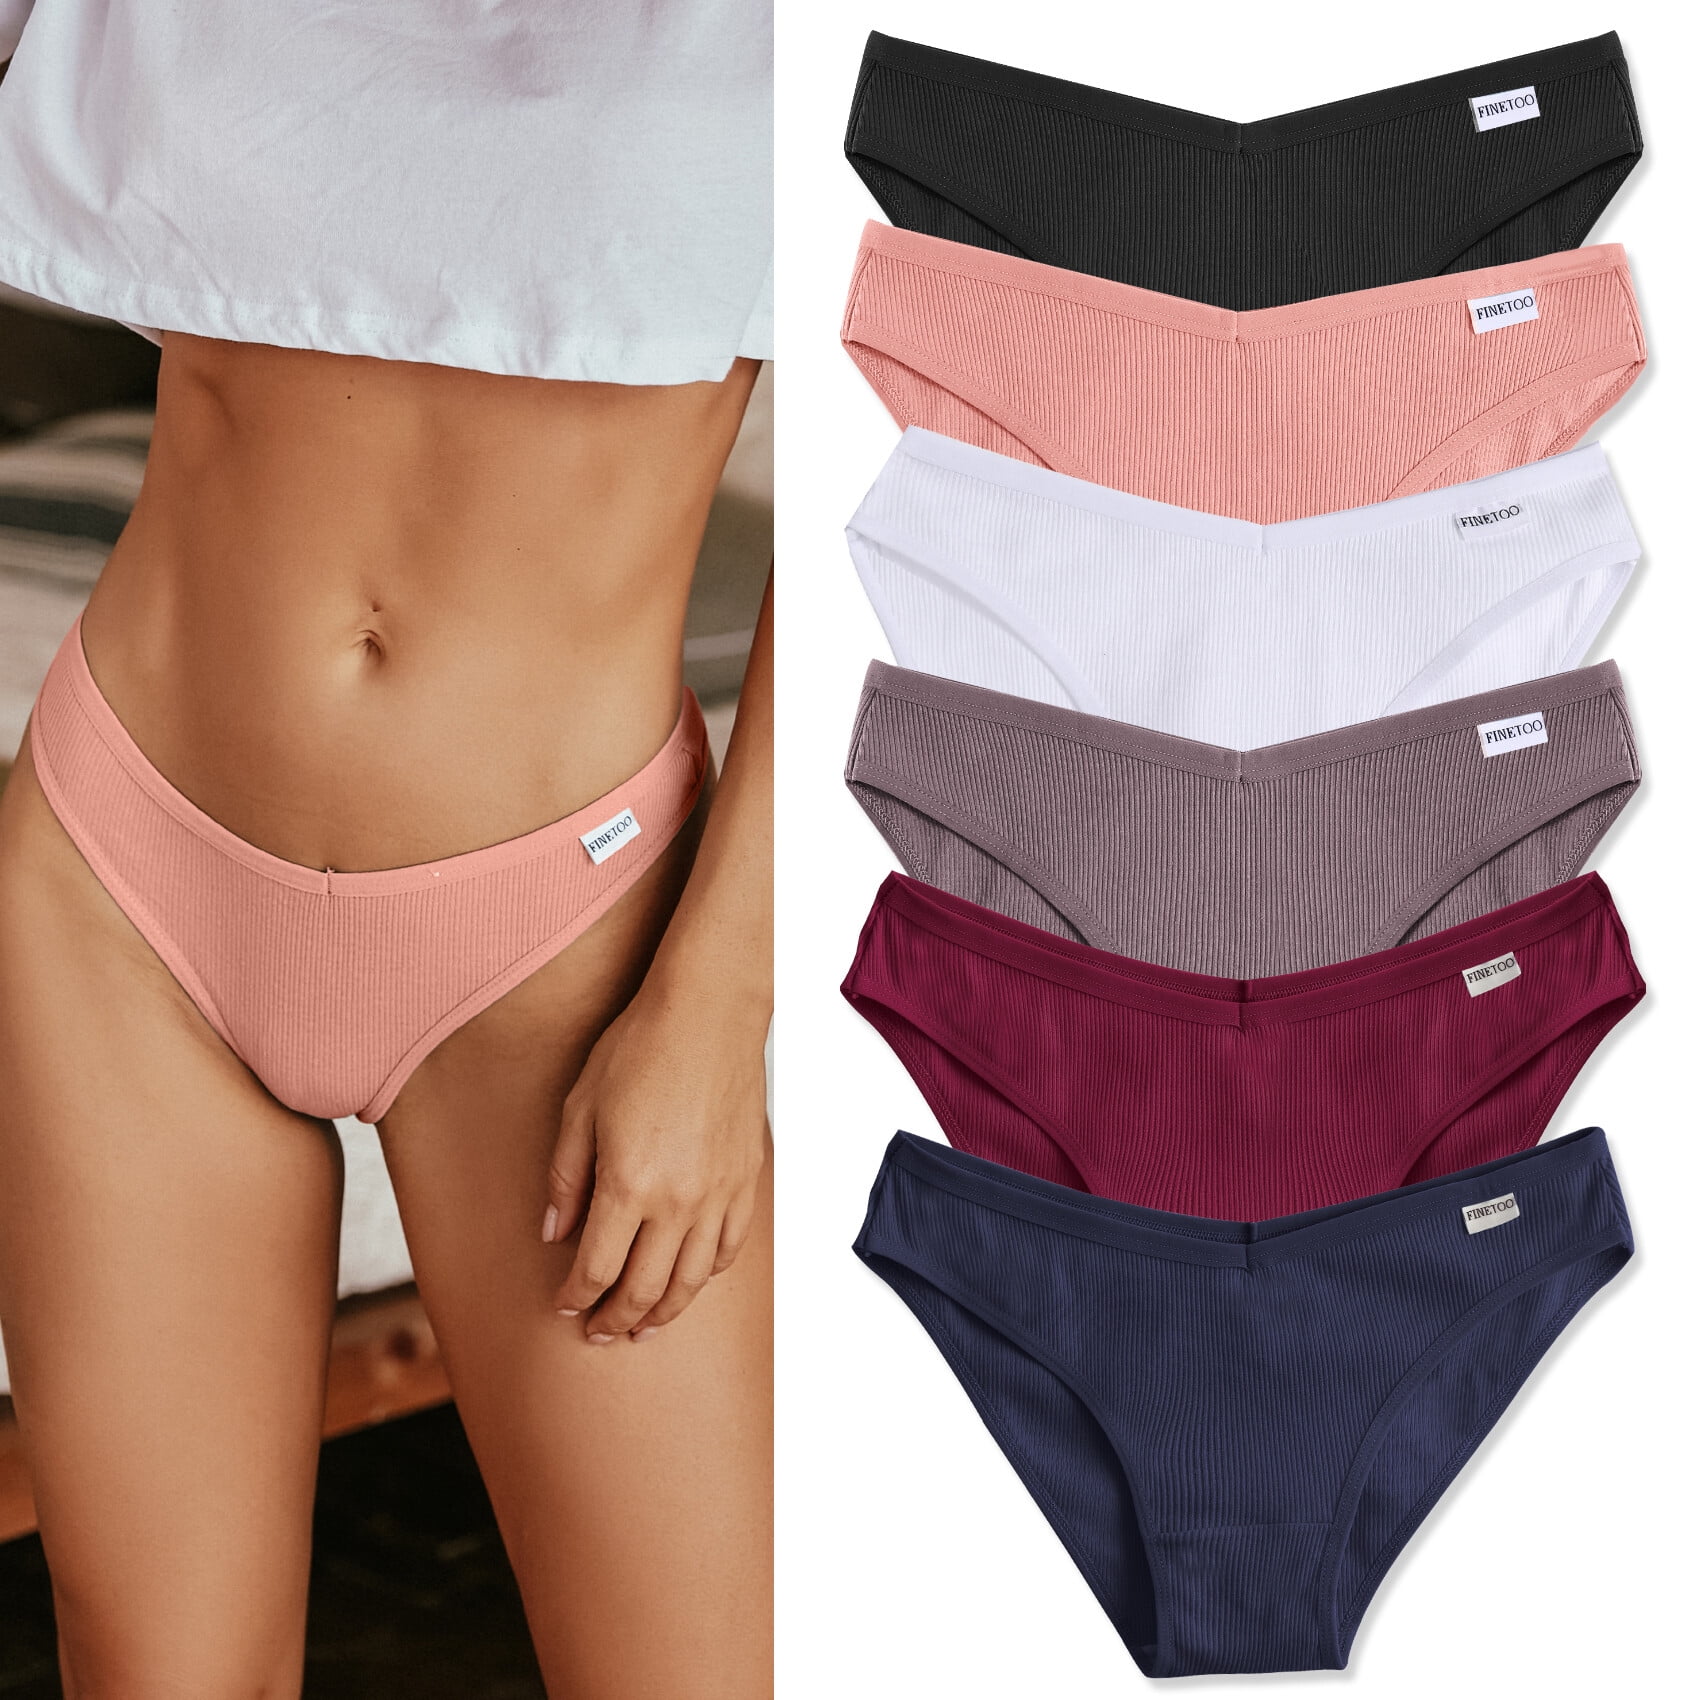 FINETOO Low-Rise Cotton Panties Women Bikini Underwear Sexy Hollow Mesh  Briefs Girls Underpants M-XL Female Lingerie Panty 2022 - Price history &  Review, AliExpress Seller - finetoo Official Store